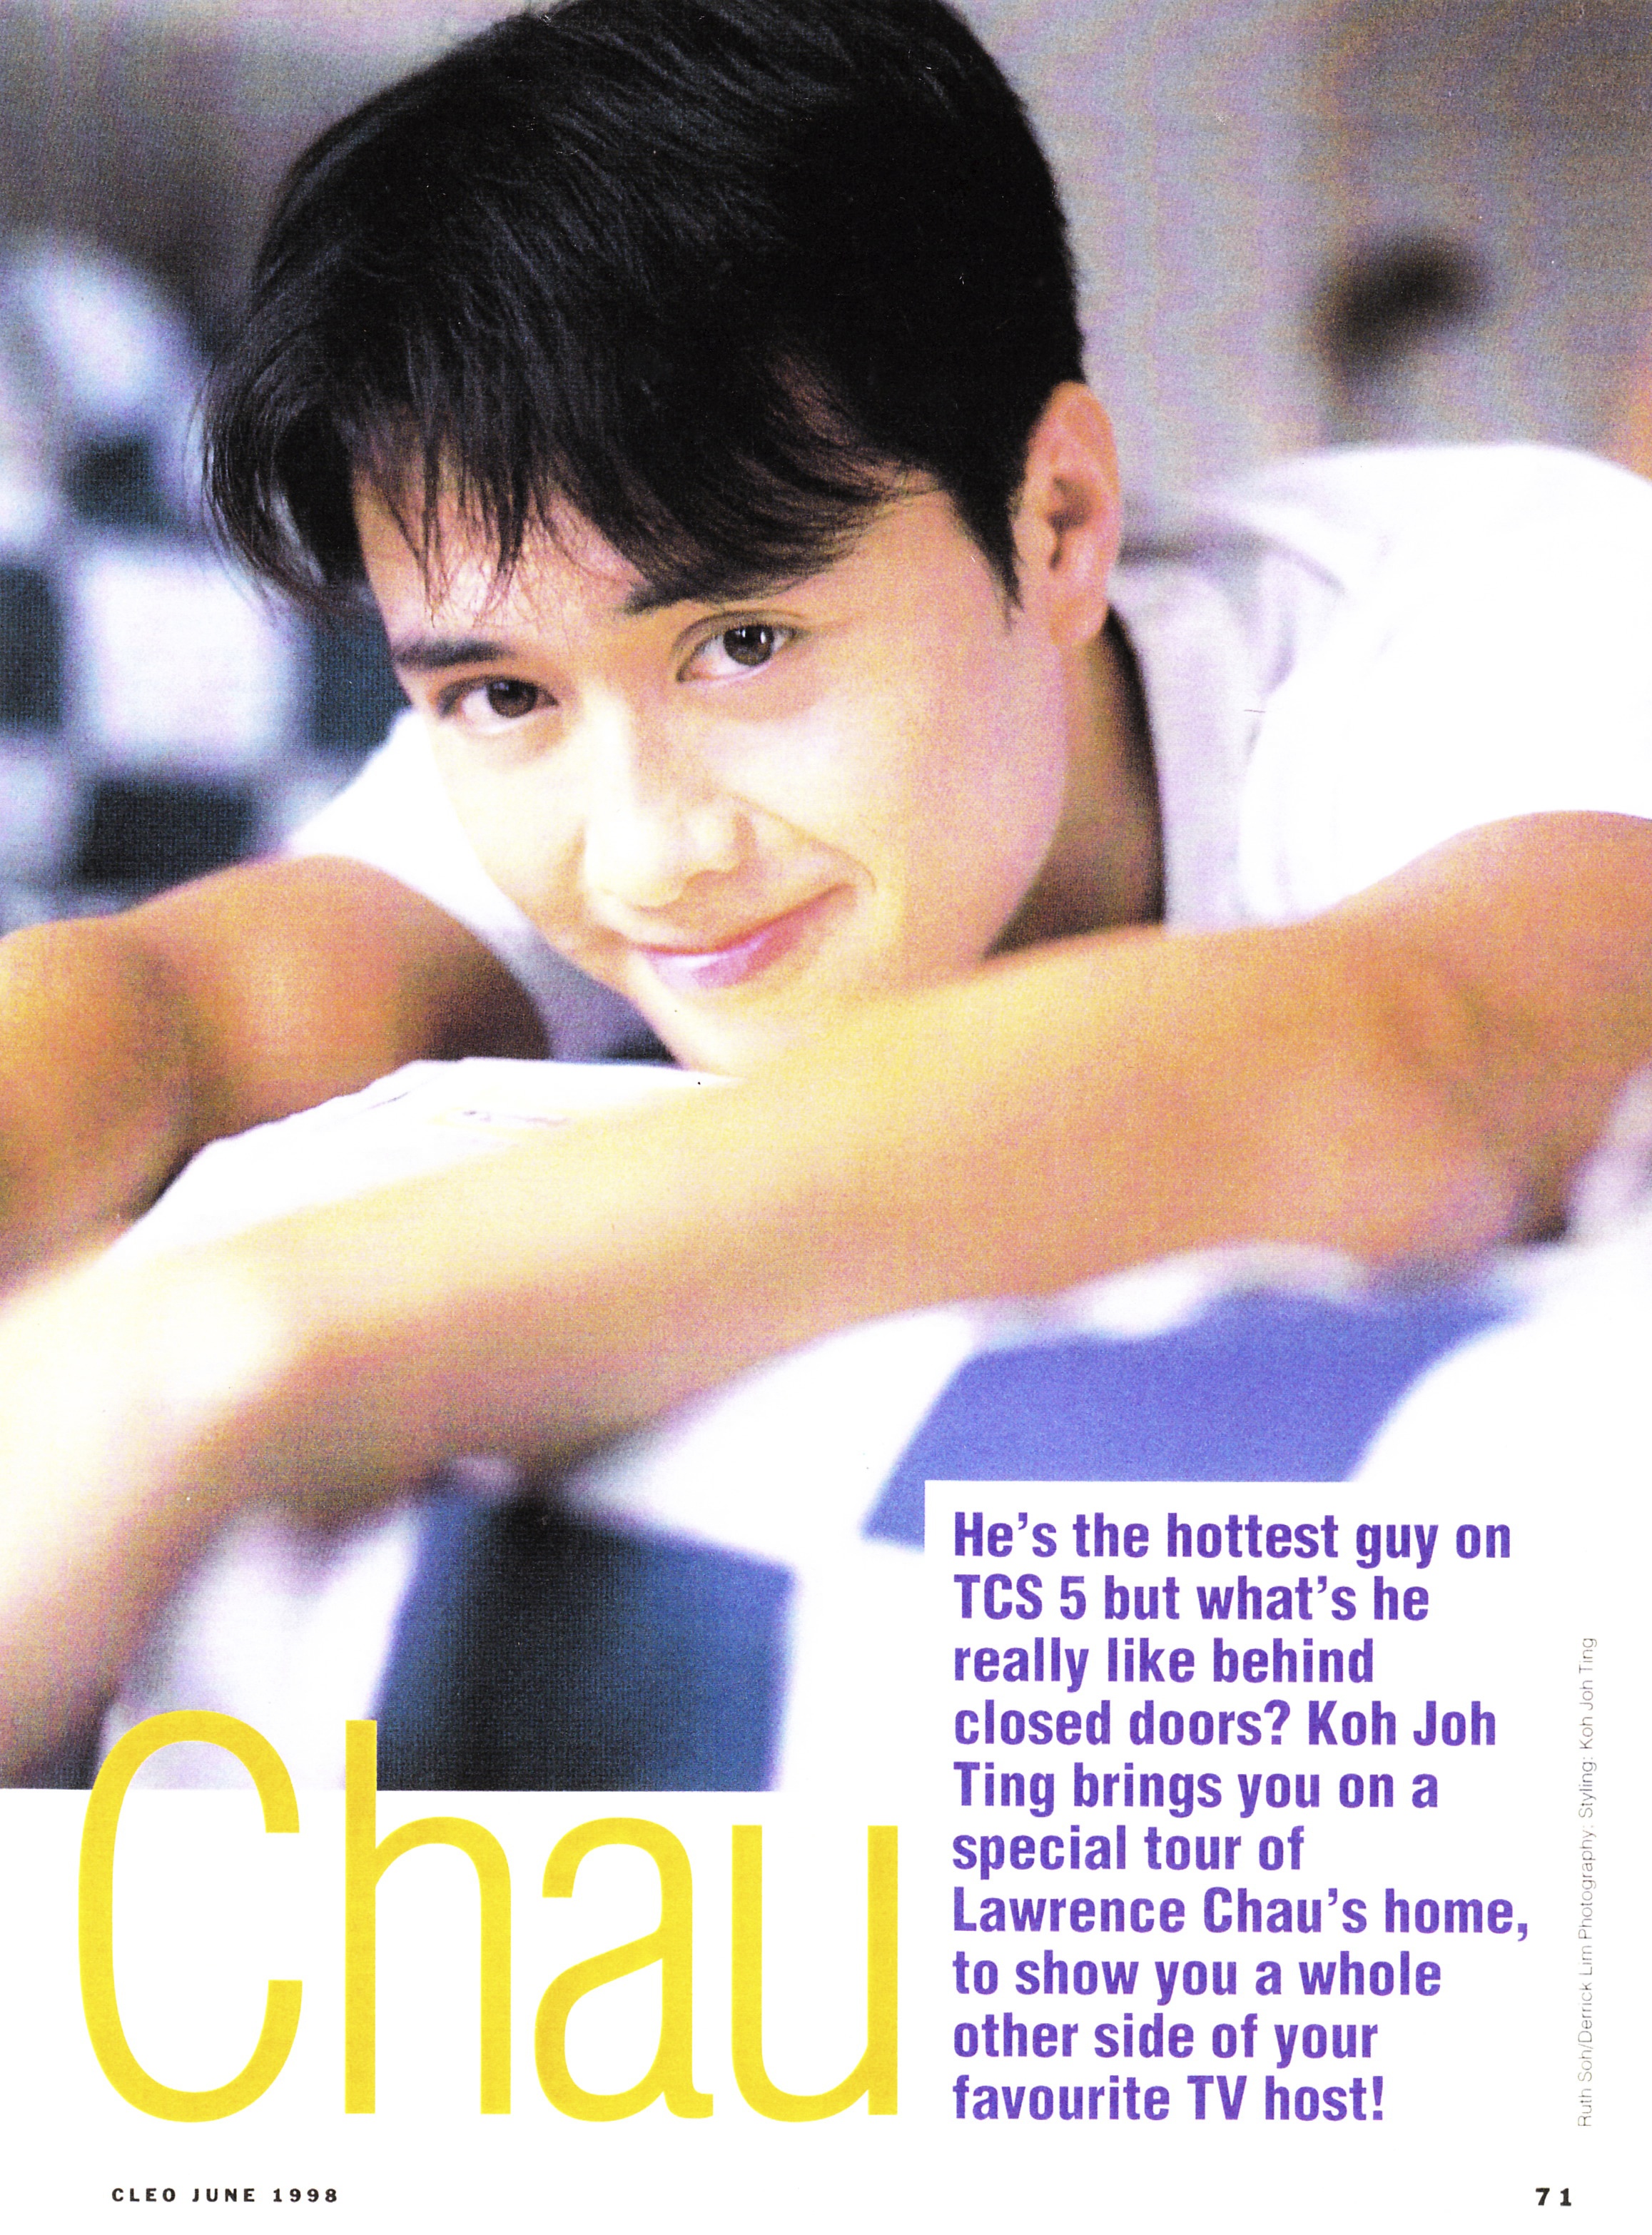 Ah, the good ol'days: Before the crows feet and wrinkles set in! Cleo magazine, Singapore.